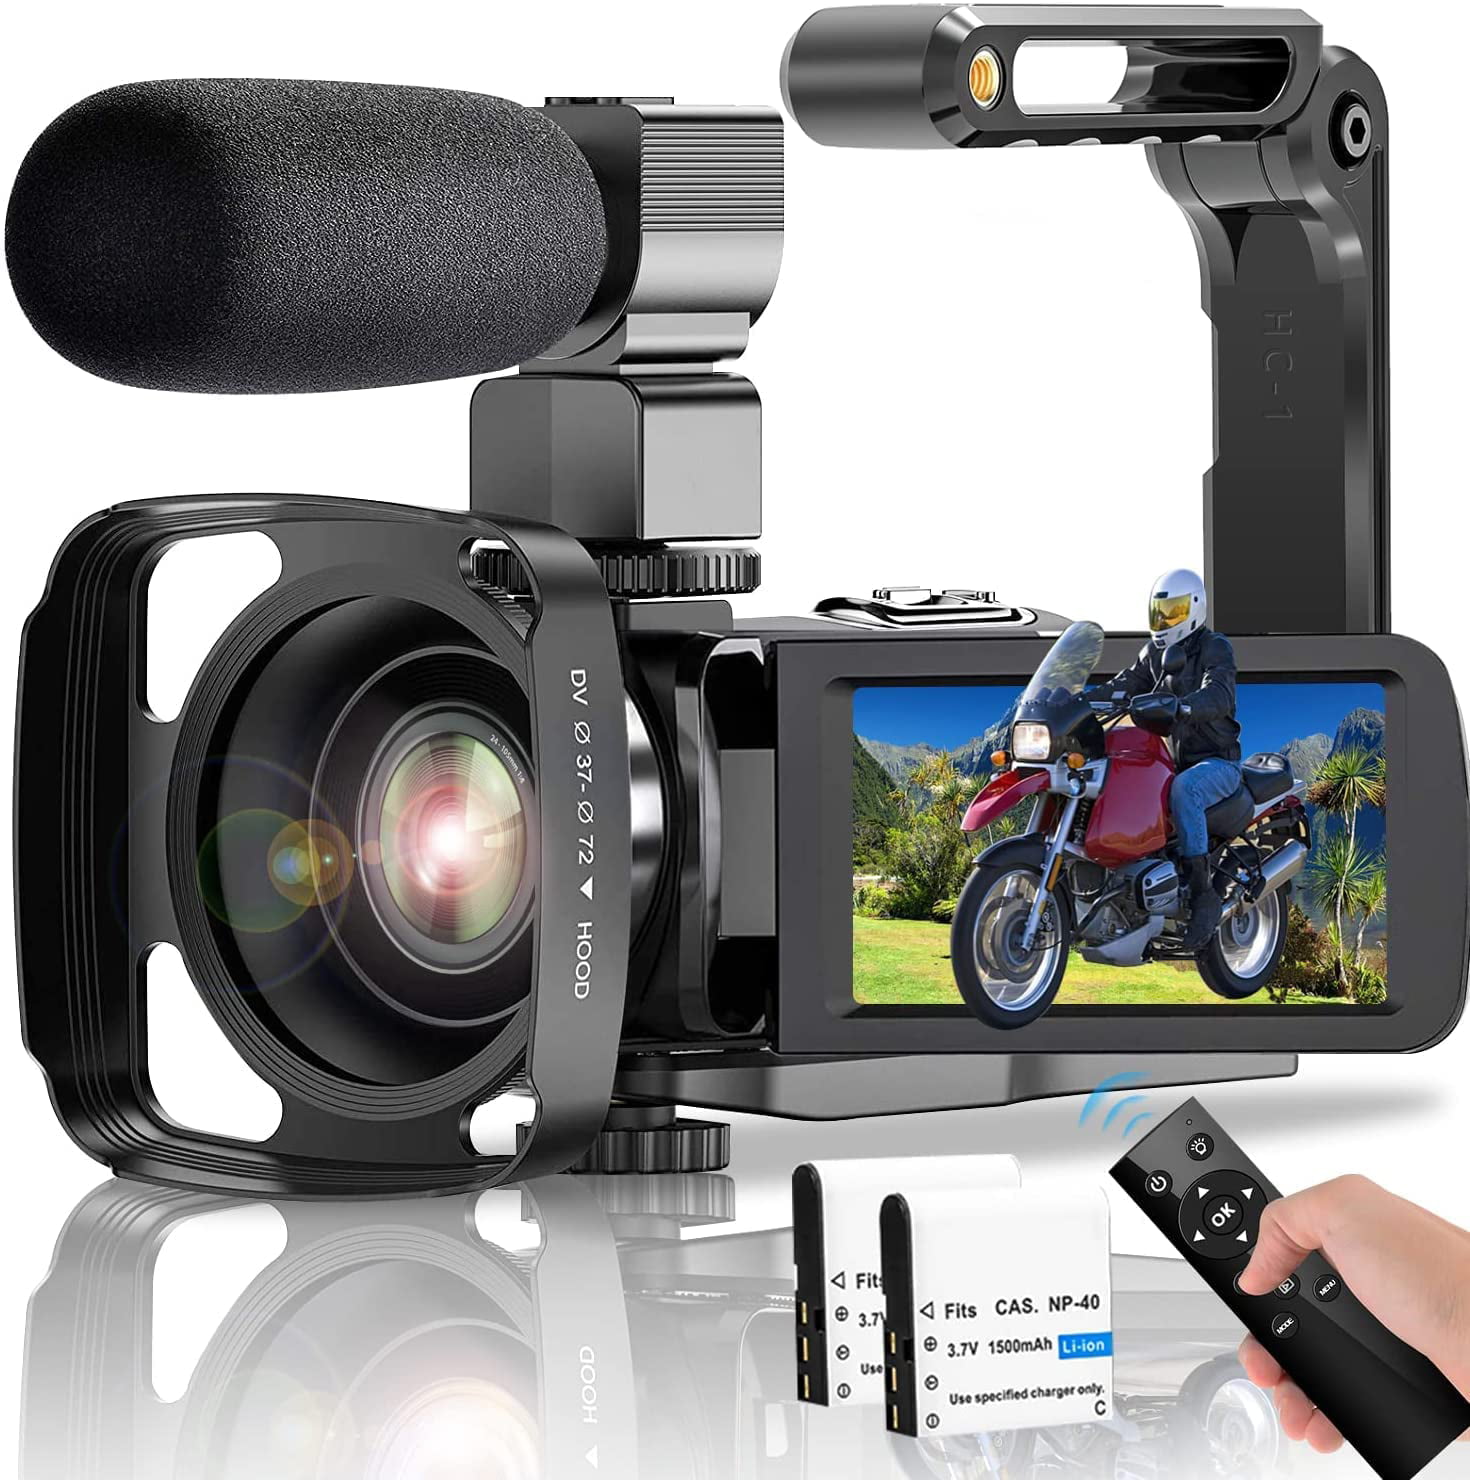 Handheld Stabilizer 3.0 Touch Flip Screen Lens Hood 4K Video Camera Camcorder 48MP 30fps Ultra HD YouTube Vlogging Camera 18x Digital Zoom and IR Night Vision with Microphone 2.4G Remote Control 